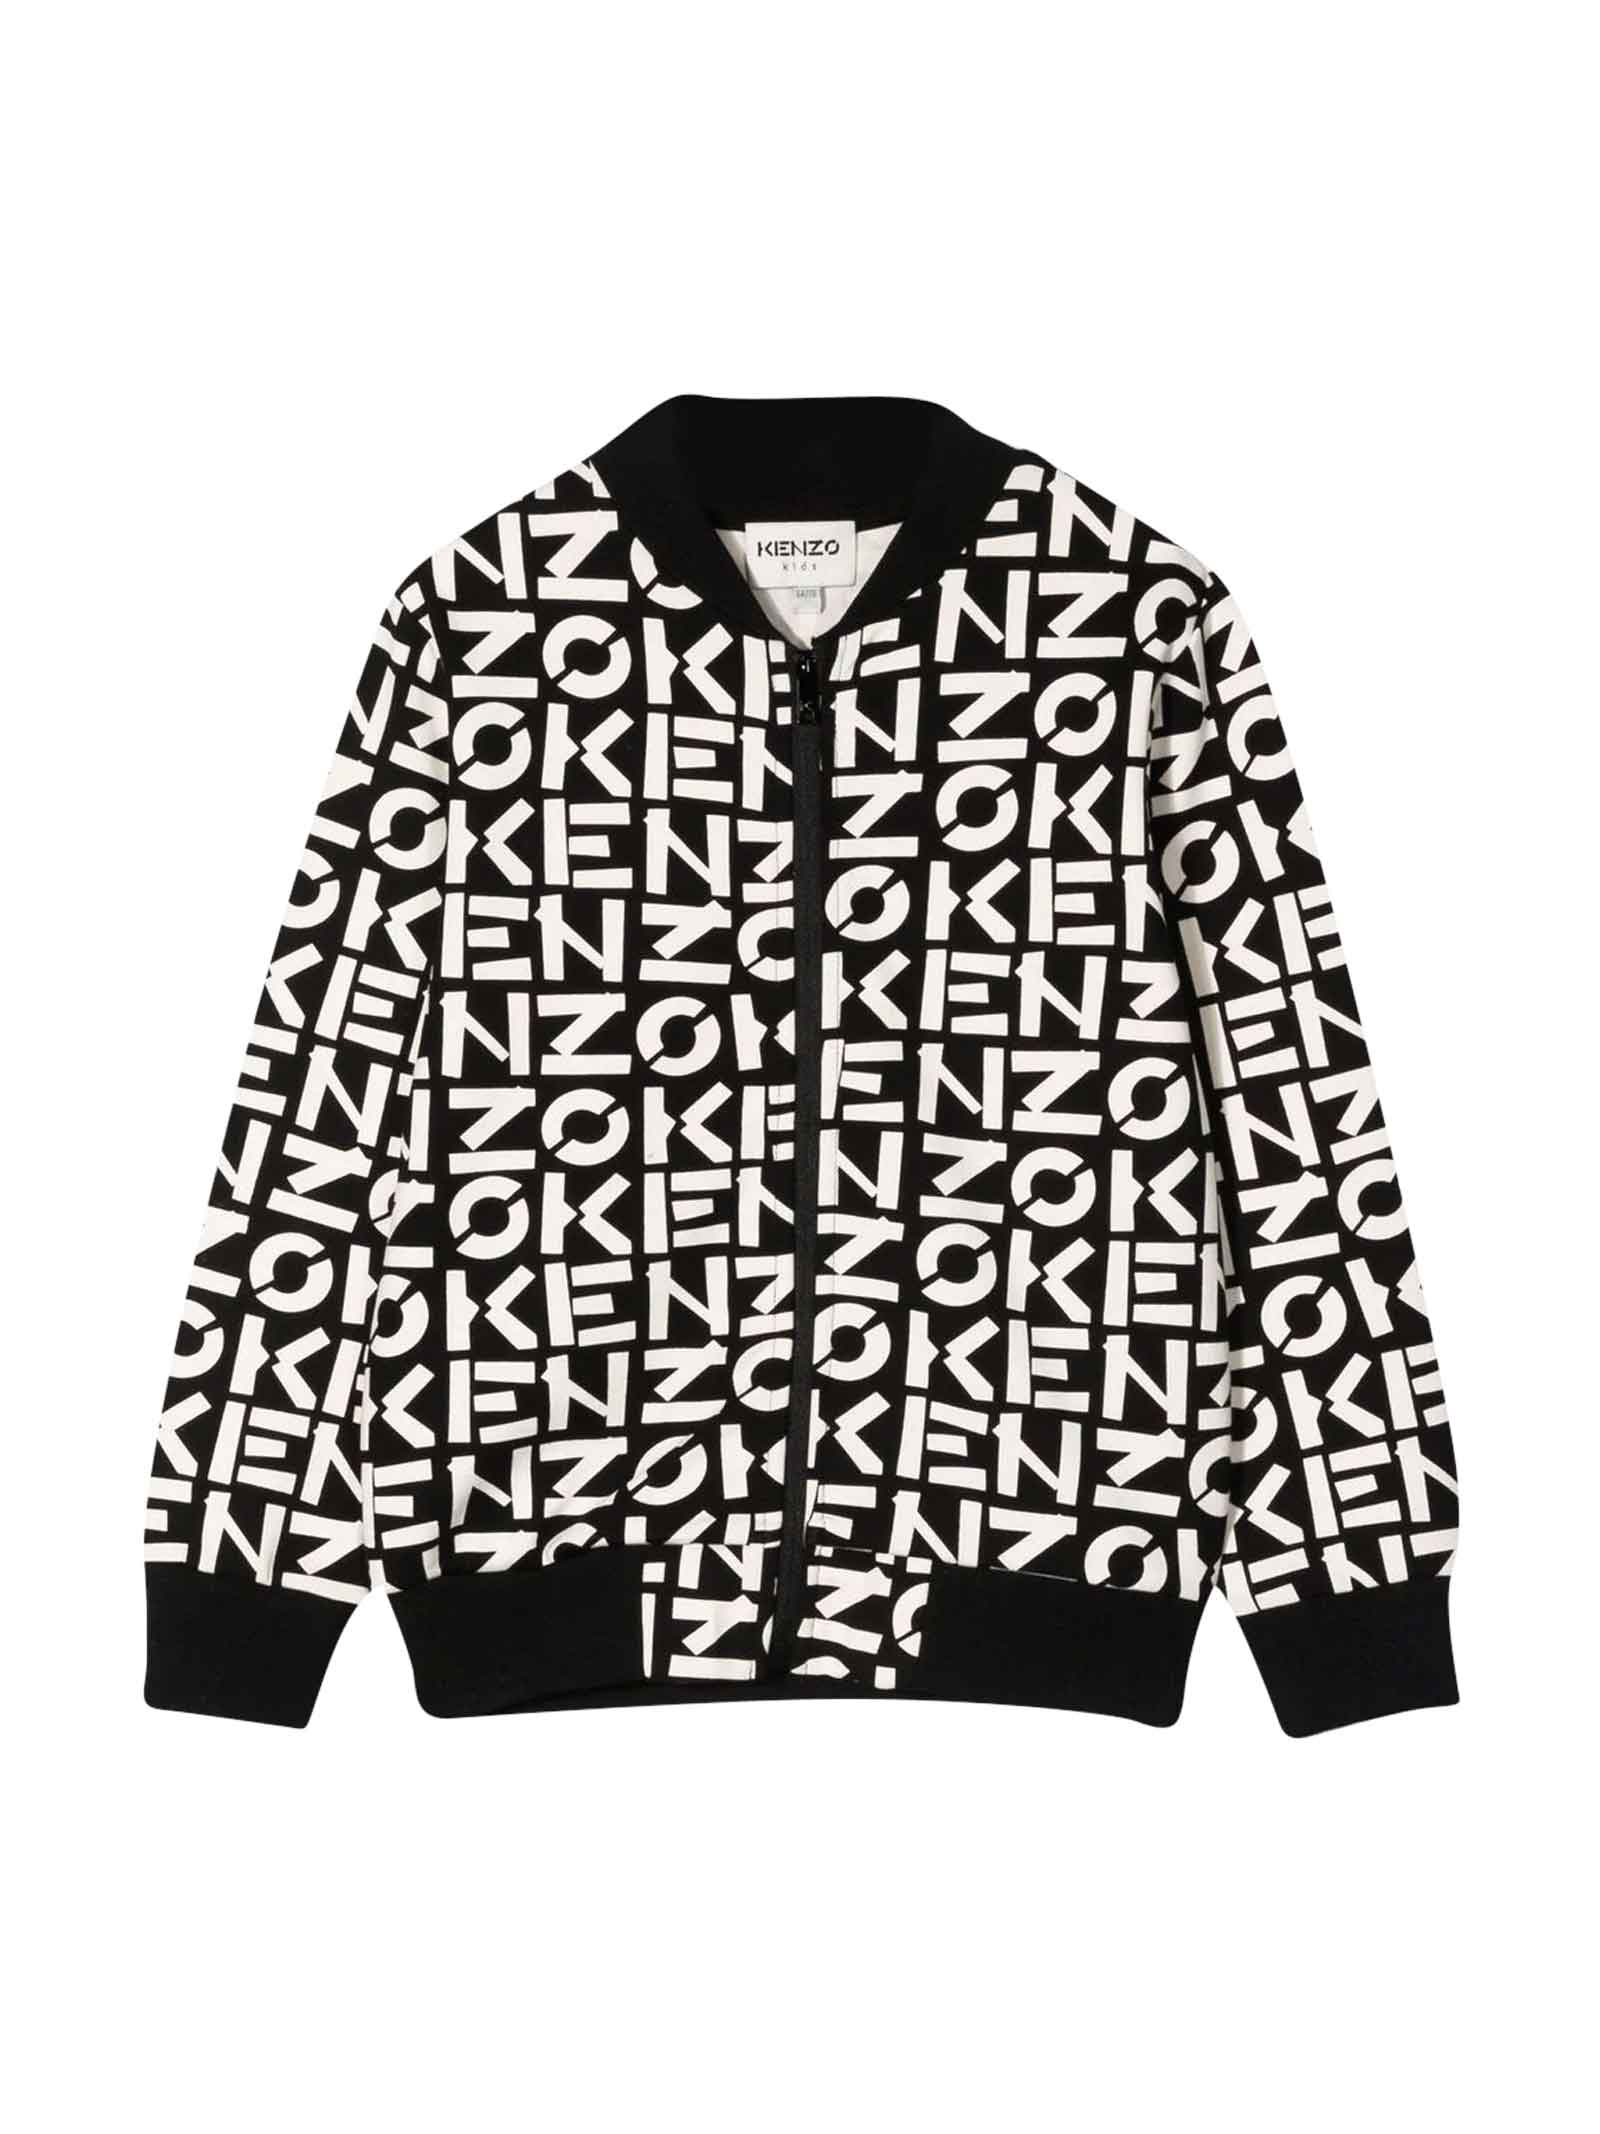 Kenzo Kids Black / White Boys Bomber Jacket, All-over Logo Print, Low Ribbed Collar, Front Zip Closure, Long Sleeves, Elasticated Cuffs And Elasticated Hem By.